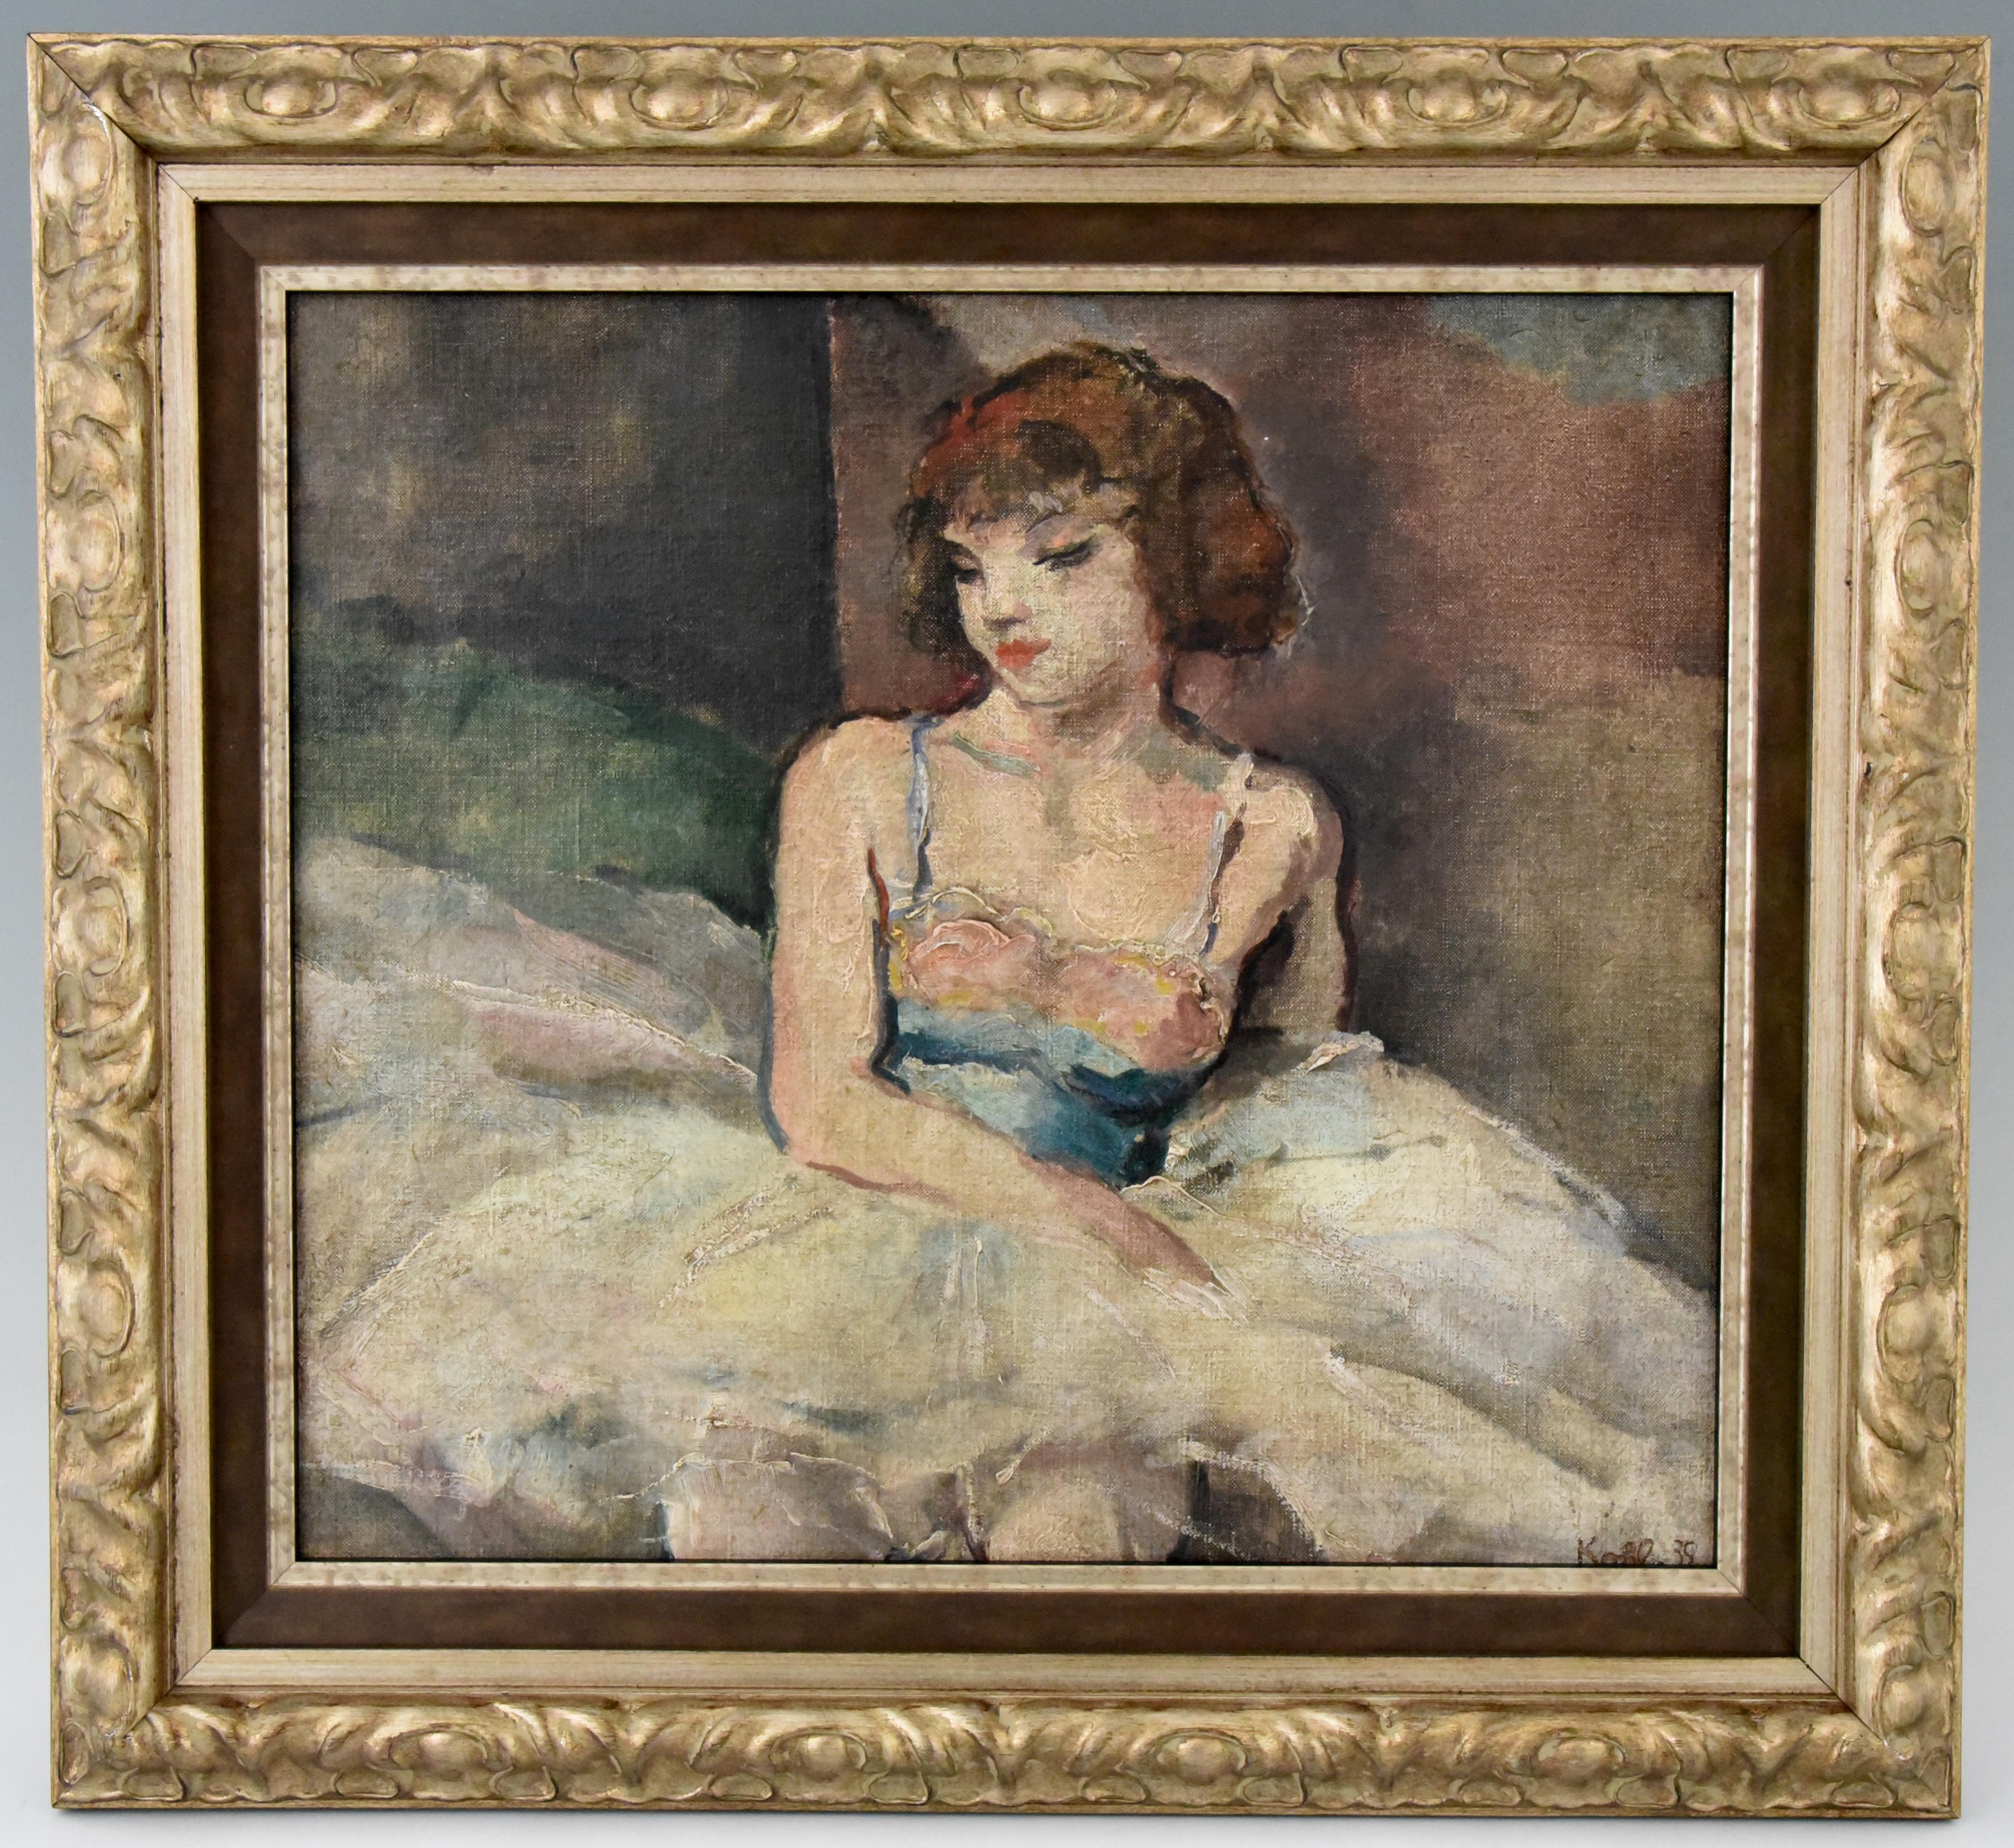 Beautiful Art Deco painting of a young ballerina girl by the famous French artist Pierre Ernest Kohl who was born in 1897 in Monaco.
Signed and dated 1935. Framed.
Size of the frame:
H. 44 cm x L. 48 cm. x. W. 3 cm.
H. 17.3 inch x L. 18.9 inch.